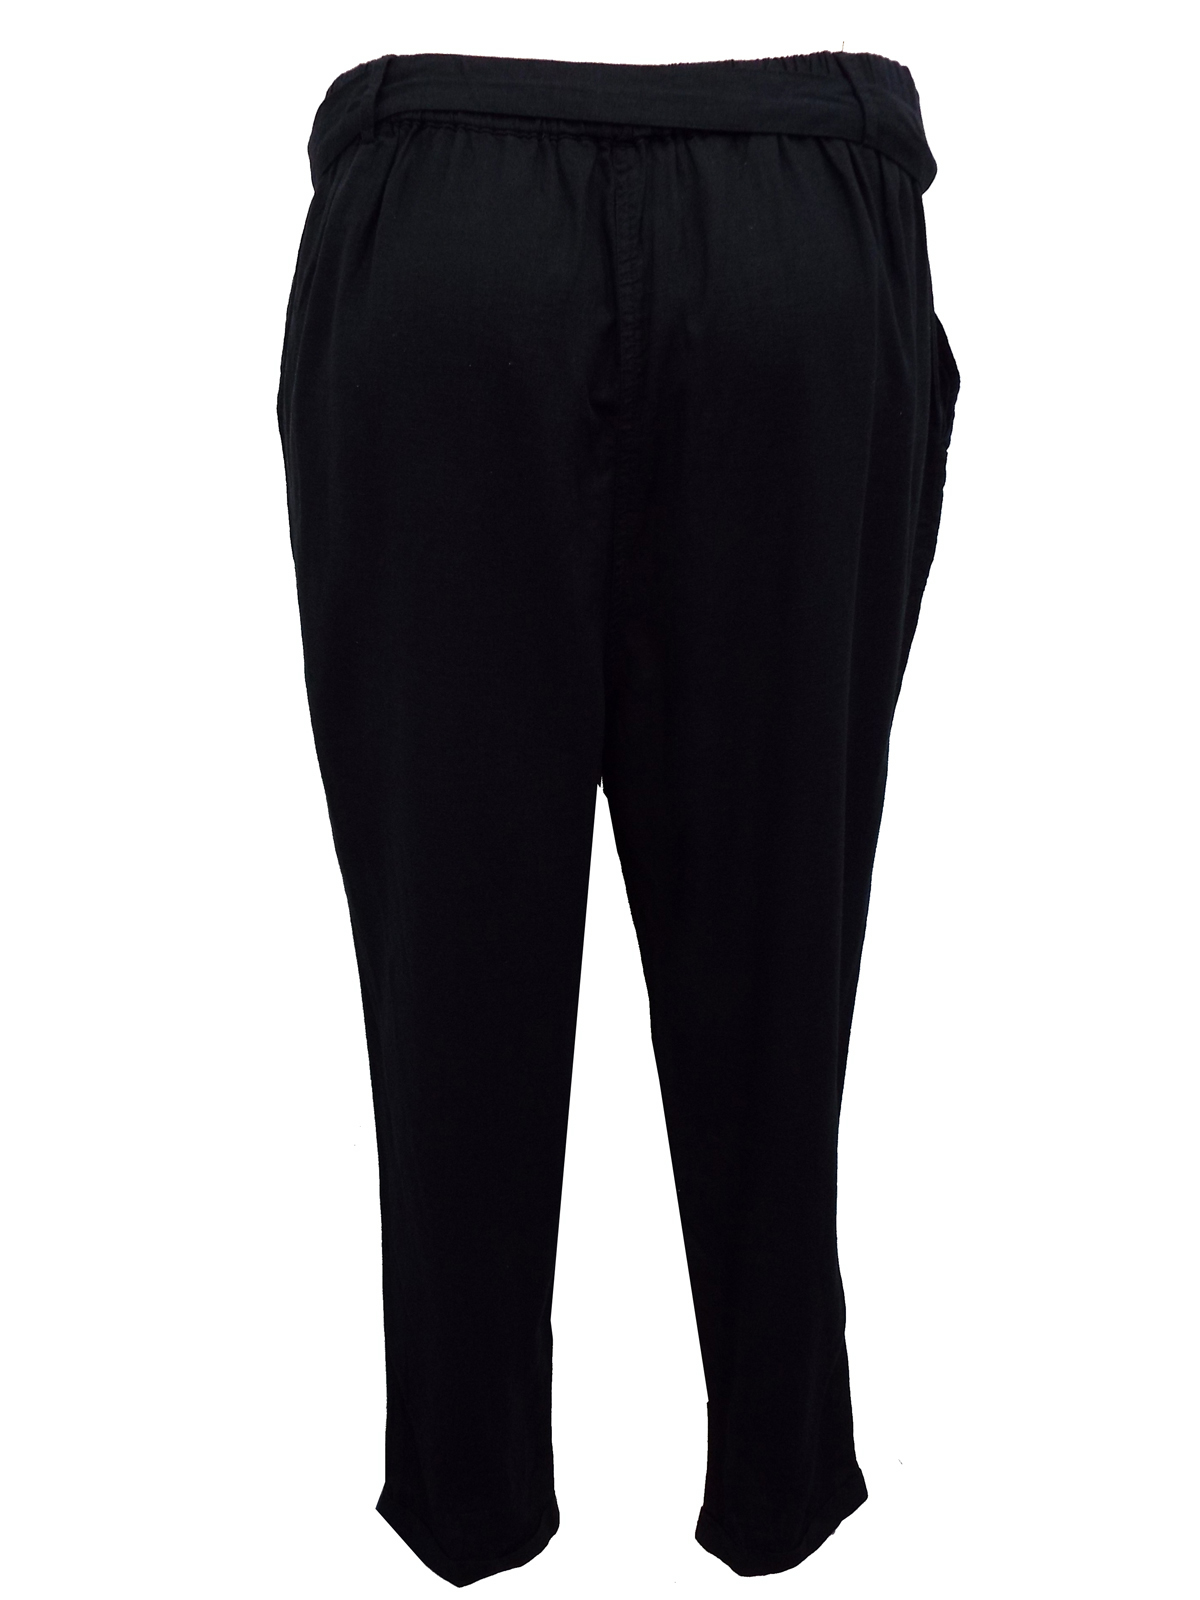 N3w L00k Curve BLACK Belted Cotton Trousers - Plus Size 18 to 28